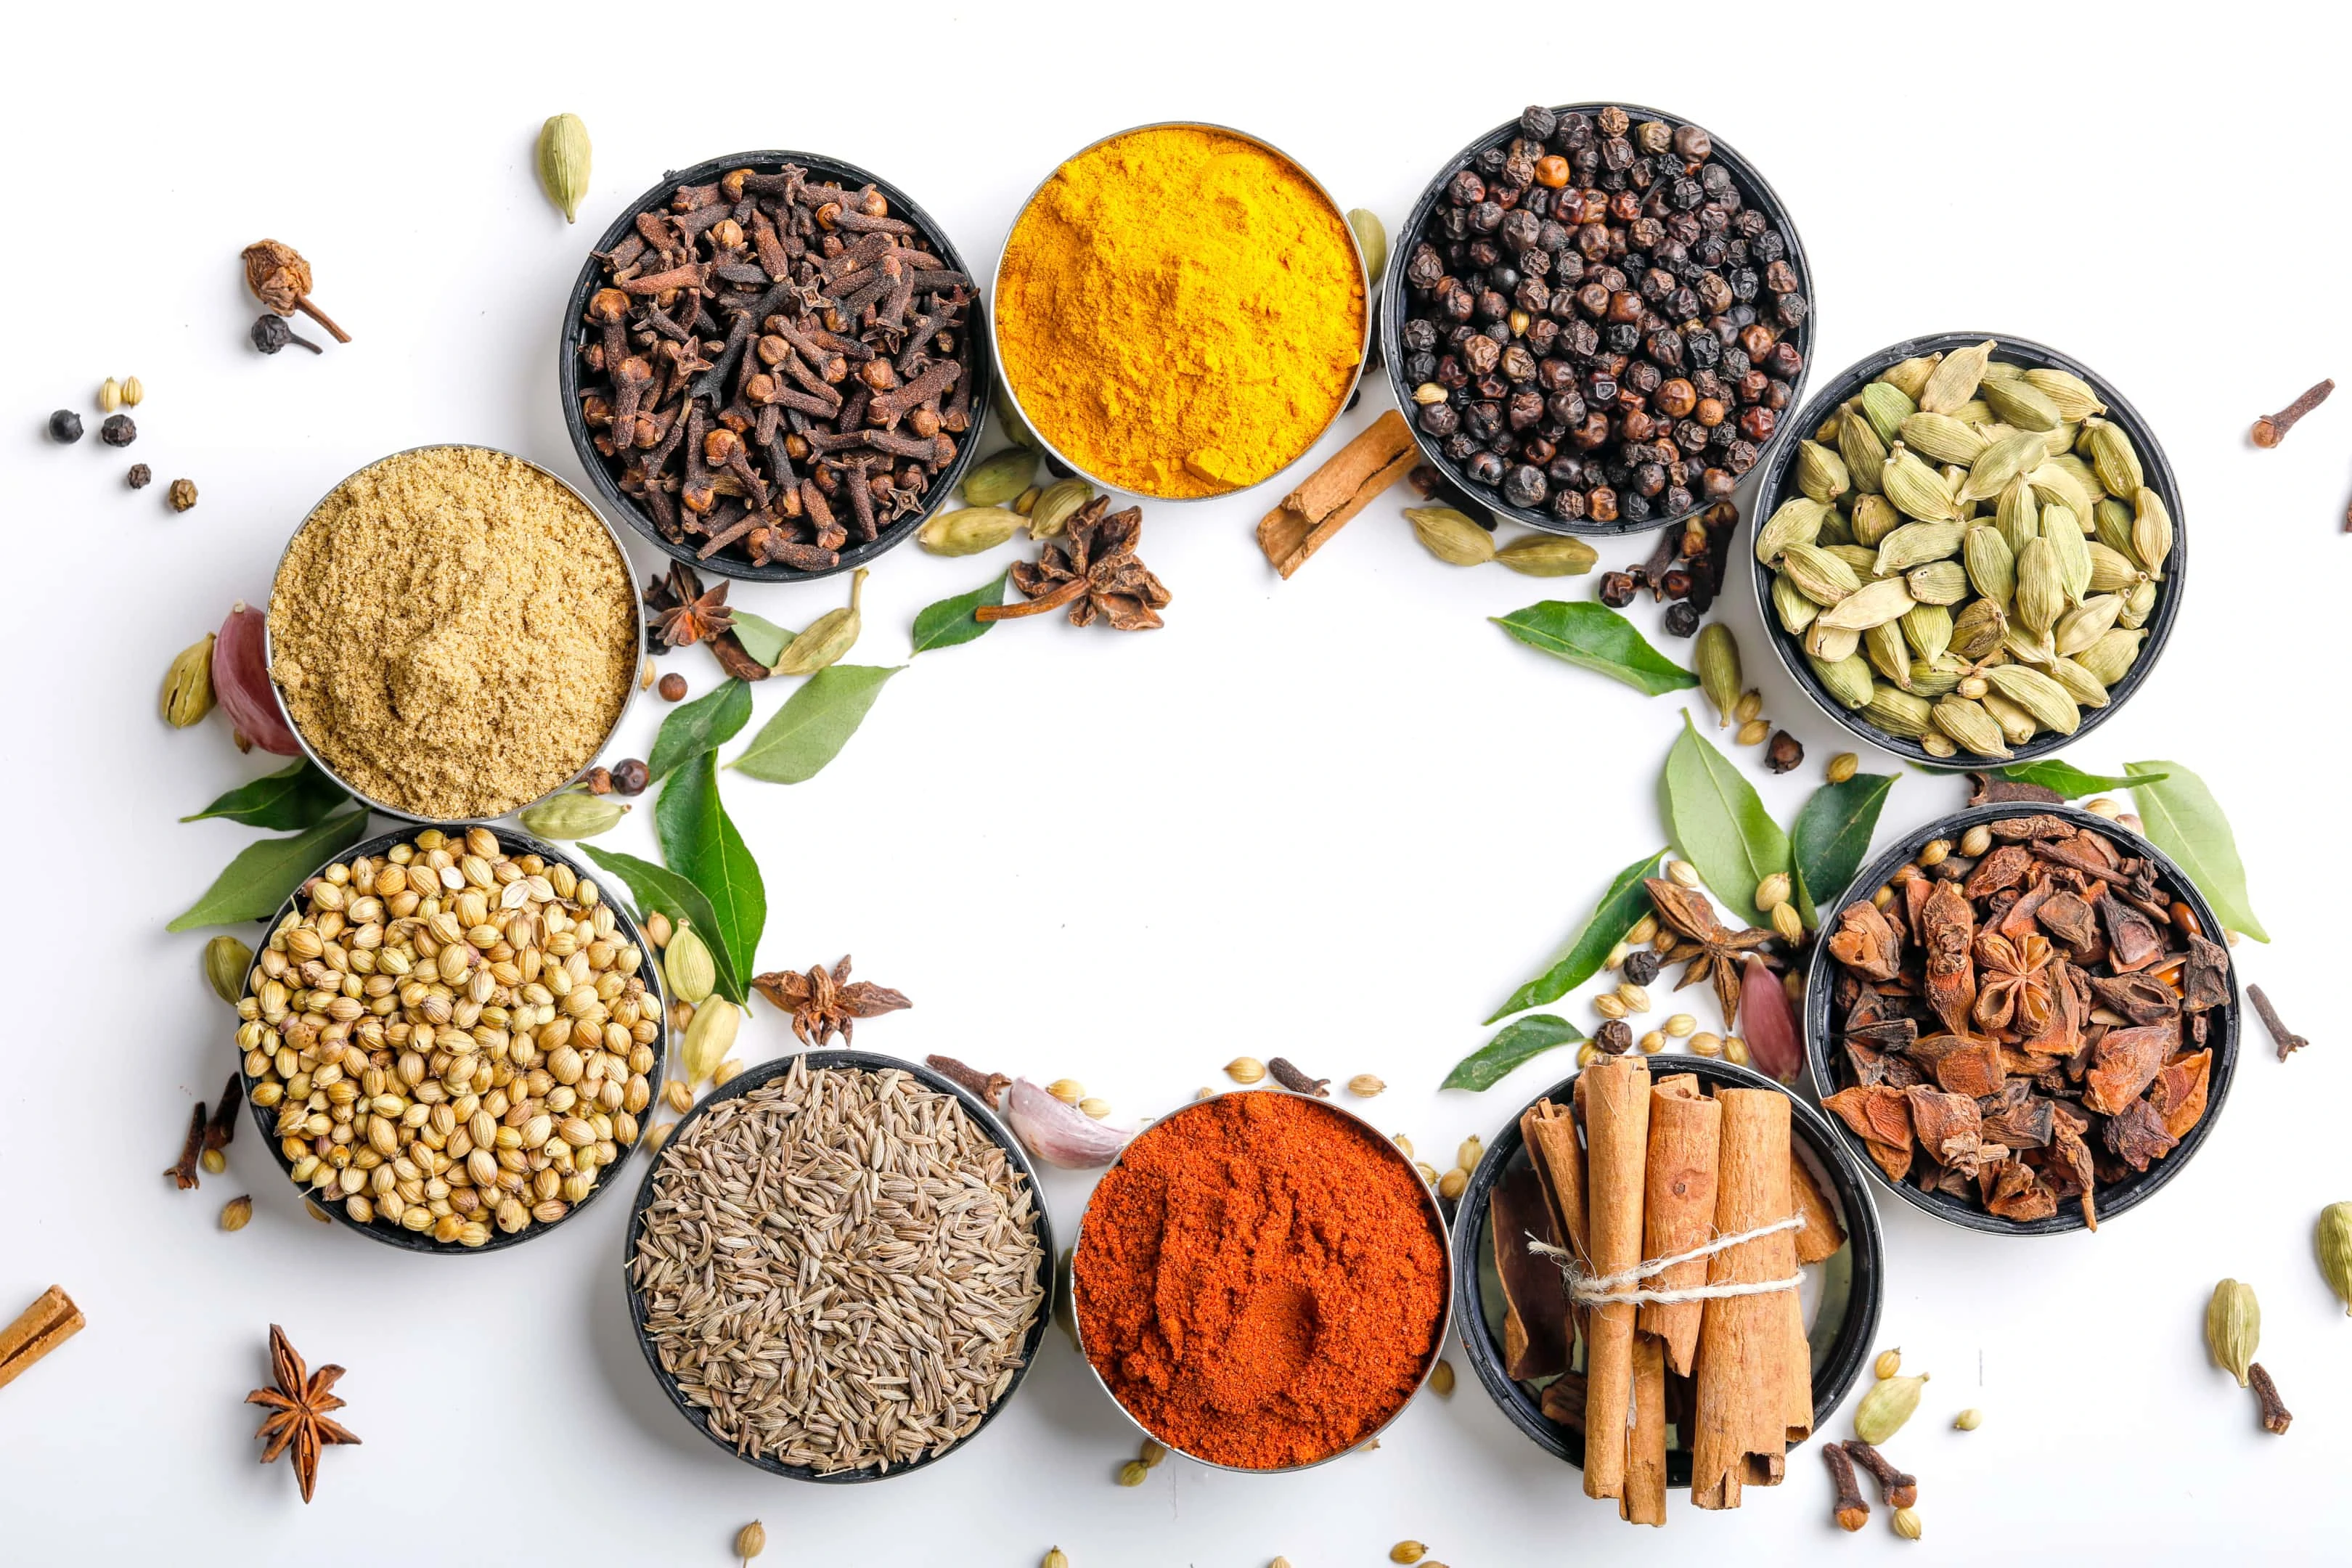 Various spices in bowls on white background